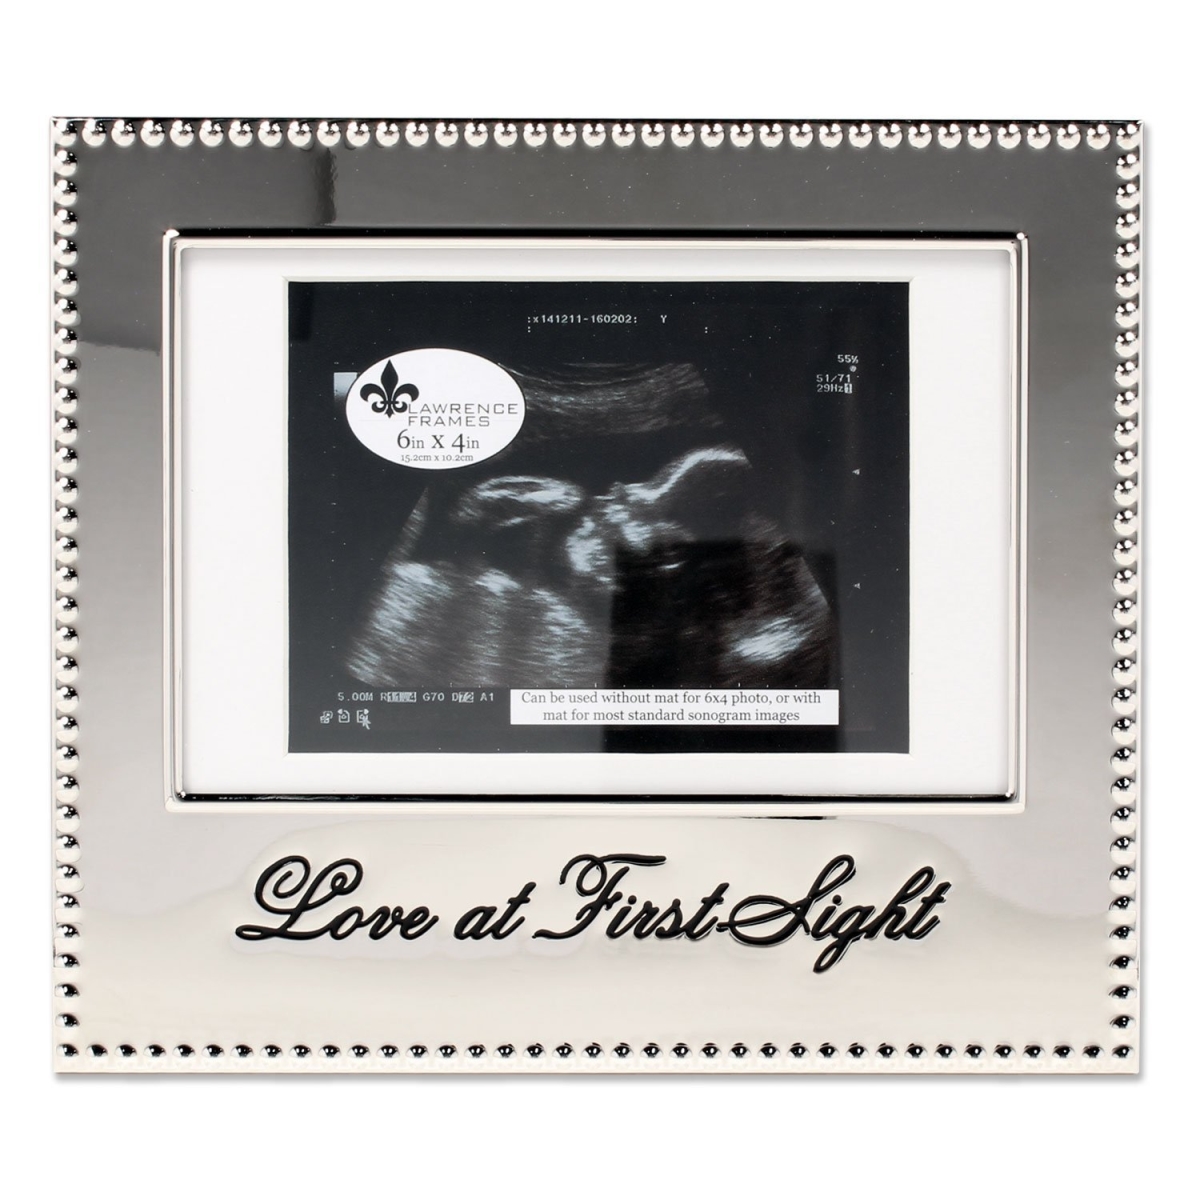 Lawrenceframes 291564 4 X 6 In. Love At First Sight Sonogram Frame, Silver